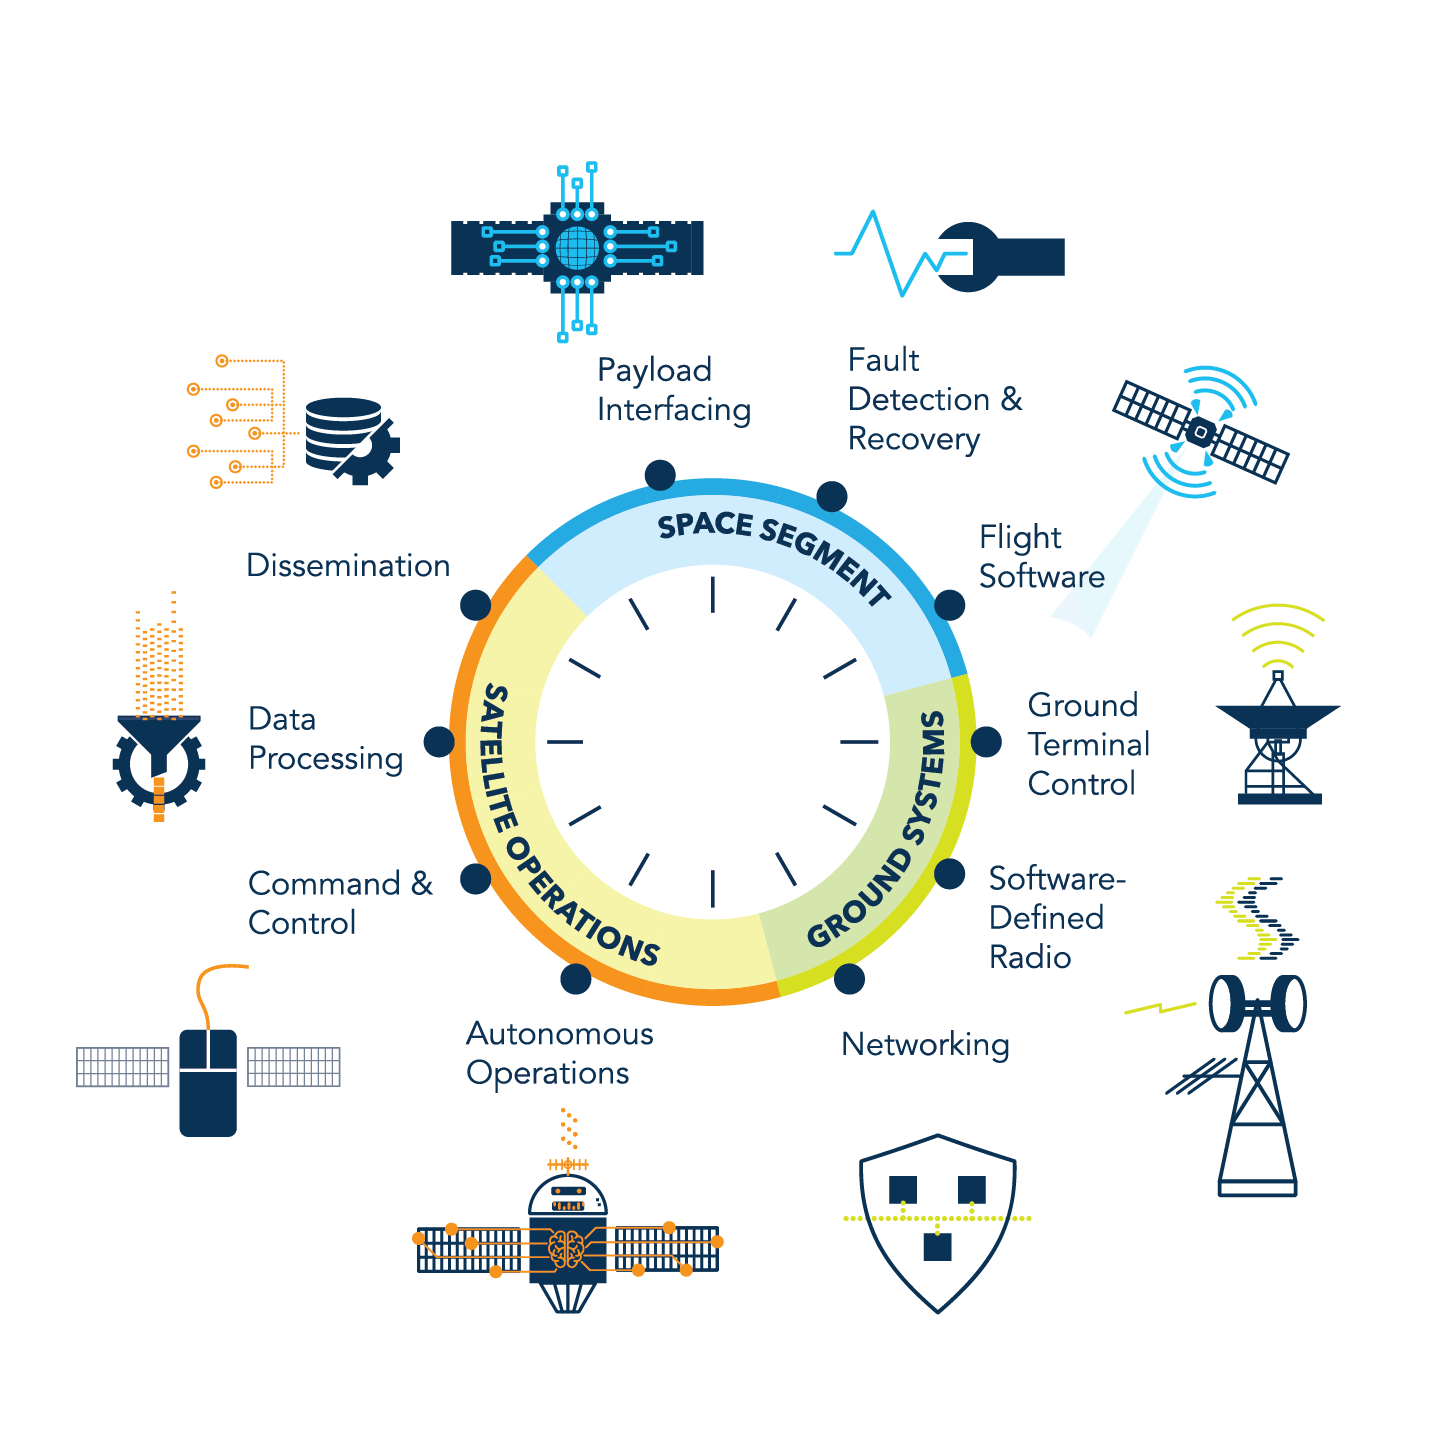 A graphic that depicts how SDL’s software development process meets customer’s needs for space ground, and satellite operations.